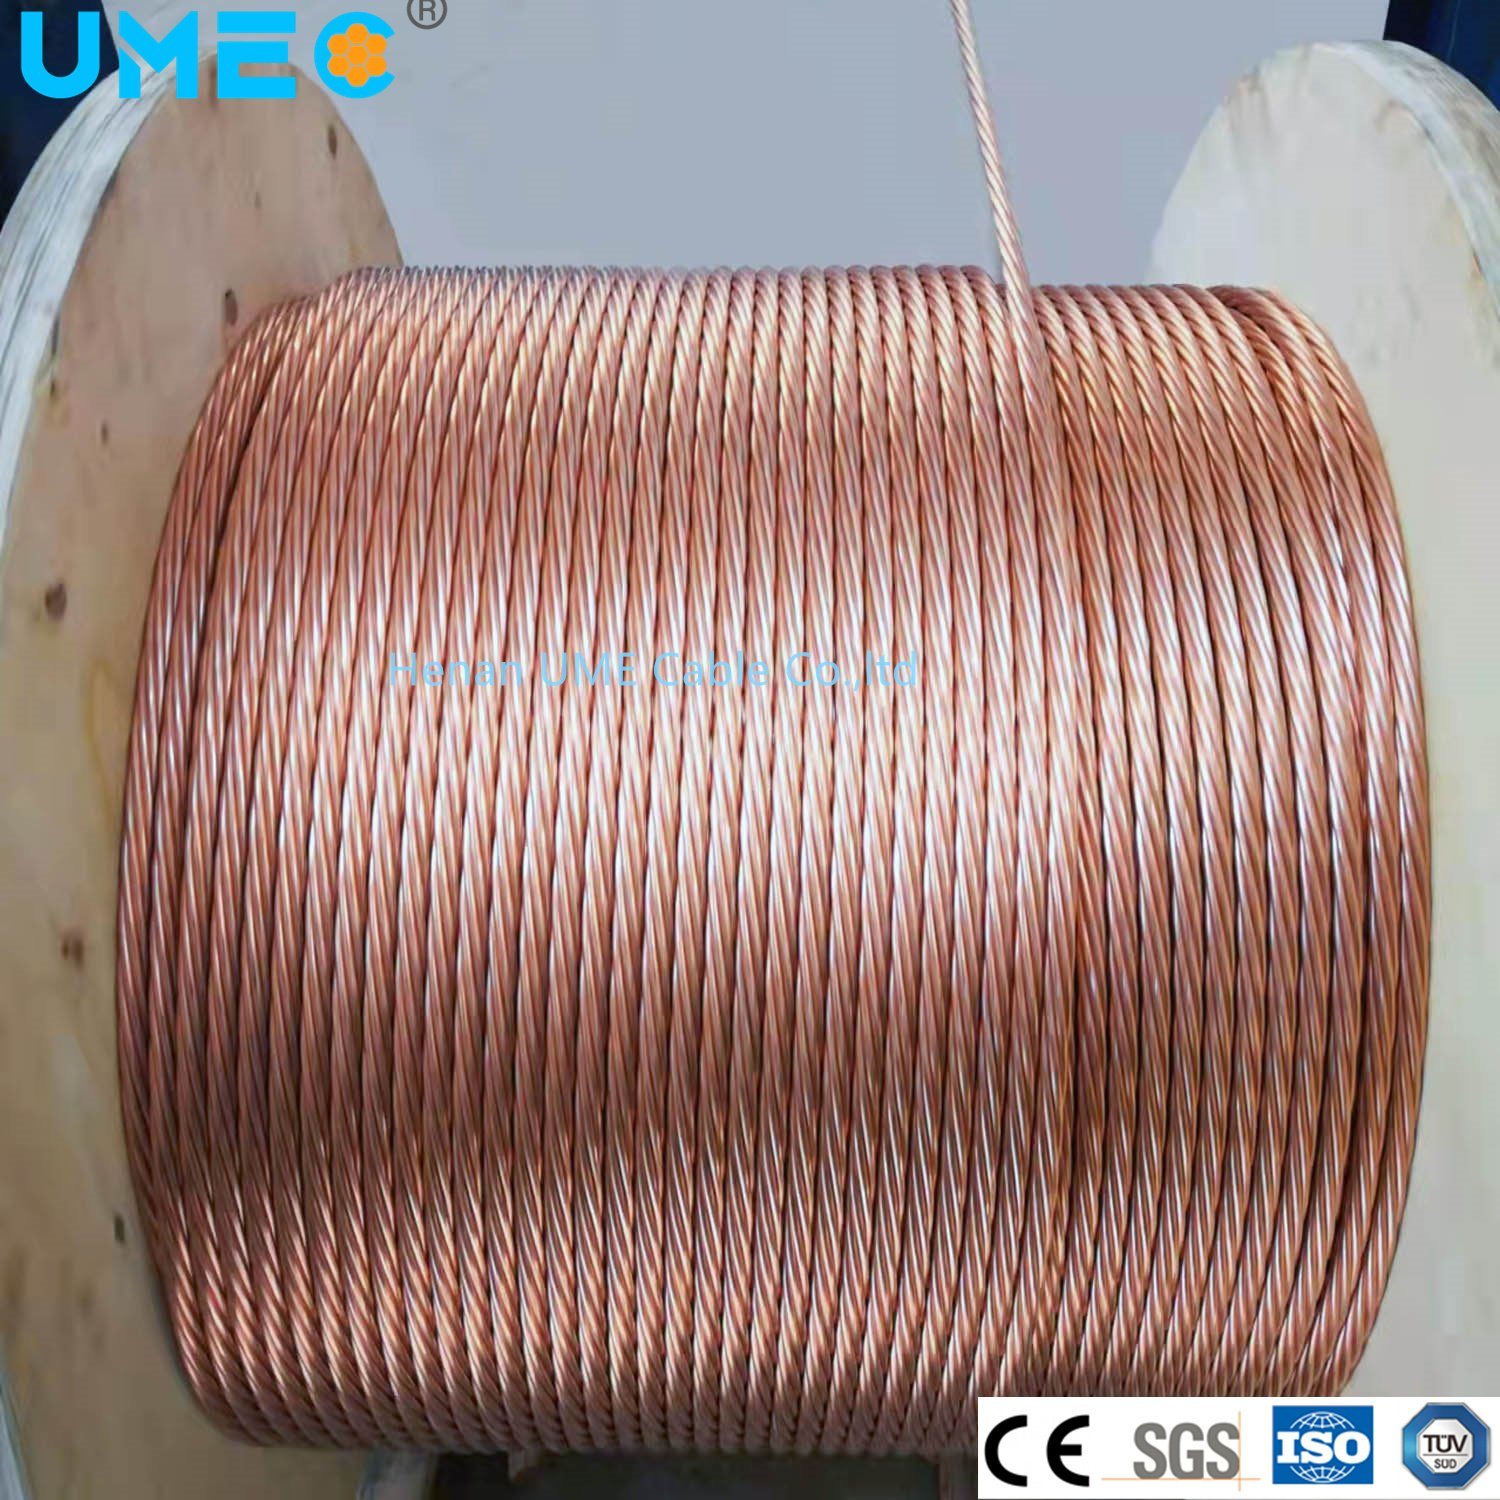 Copper-Clad Steel Wire 30% Conductivity Copper Welding CCS Conductor Electrical Cable Wire CCS